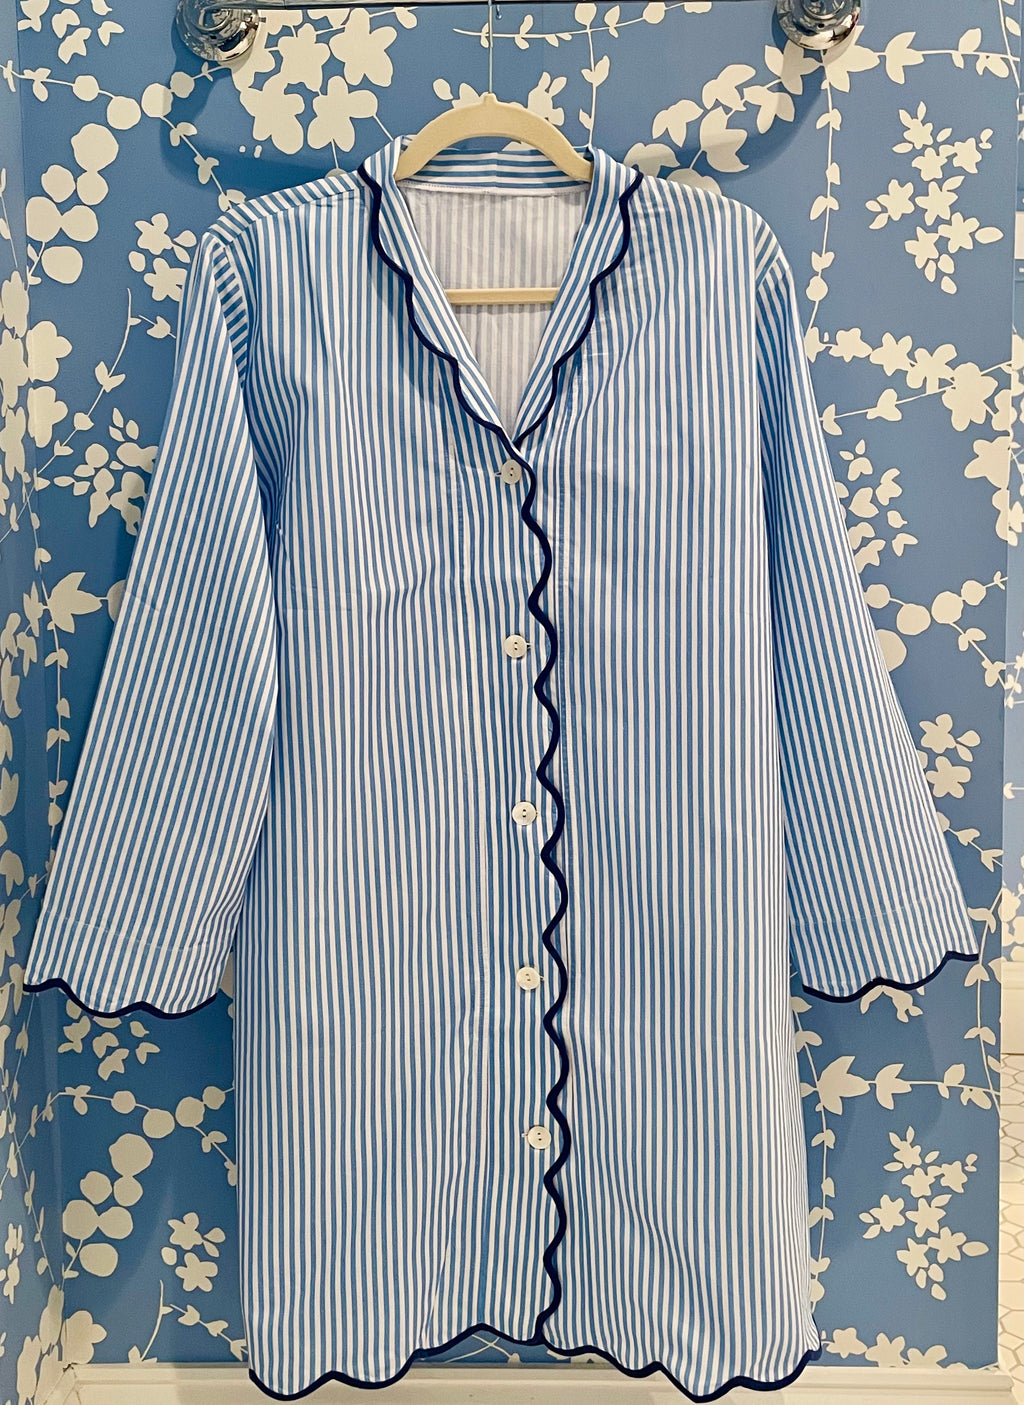 Blue and White Striped Nightshirt